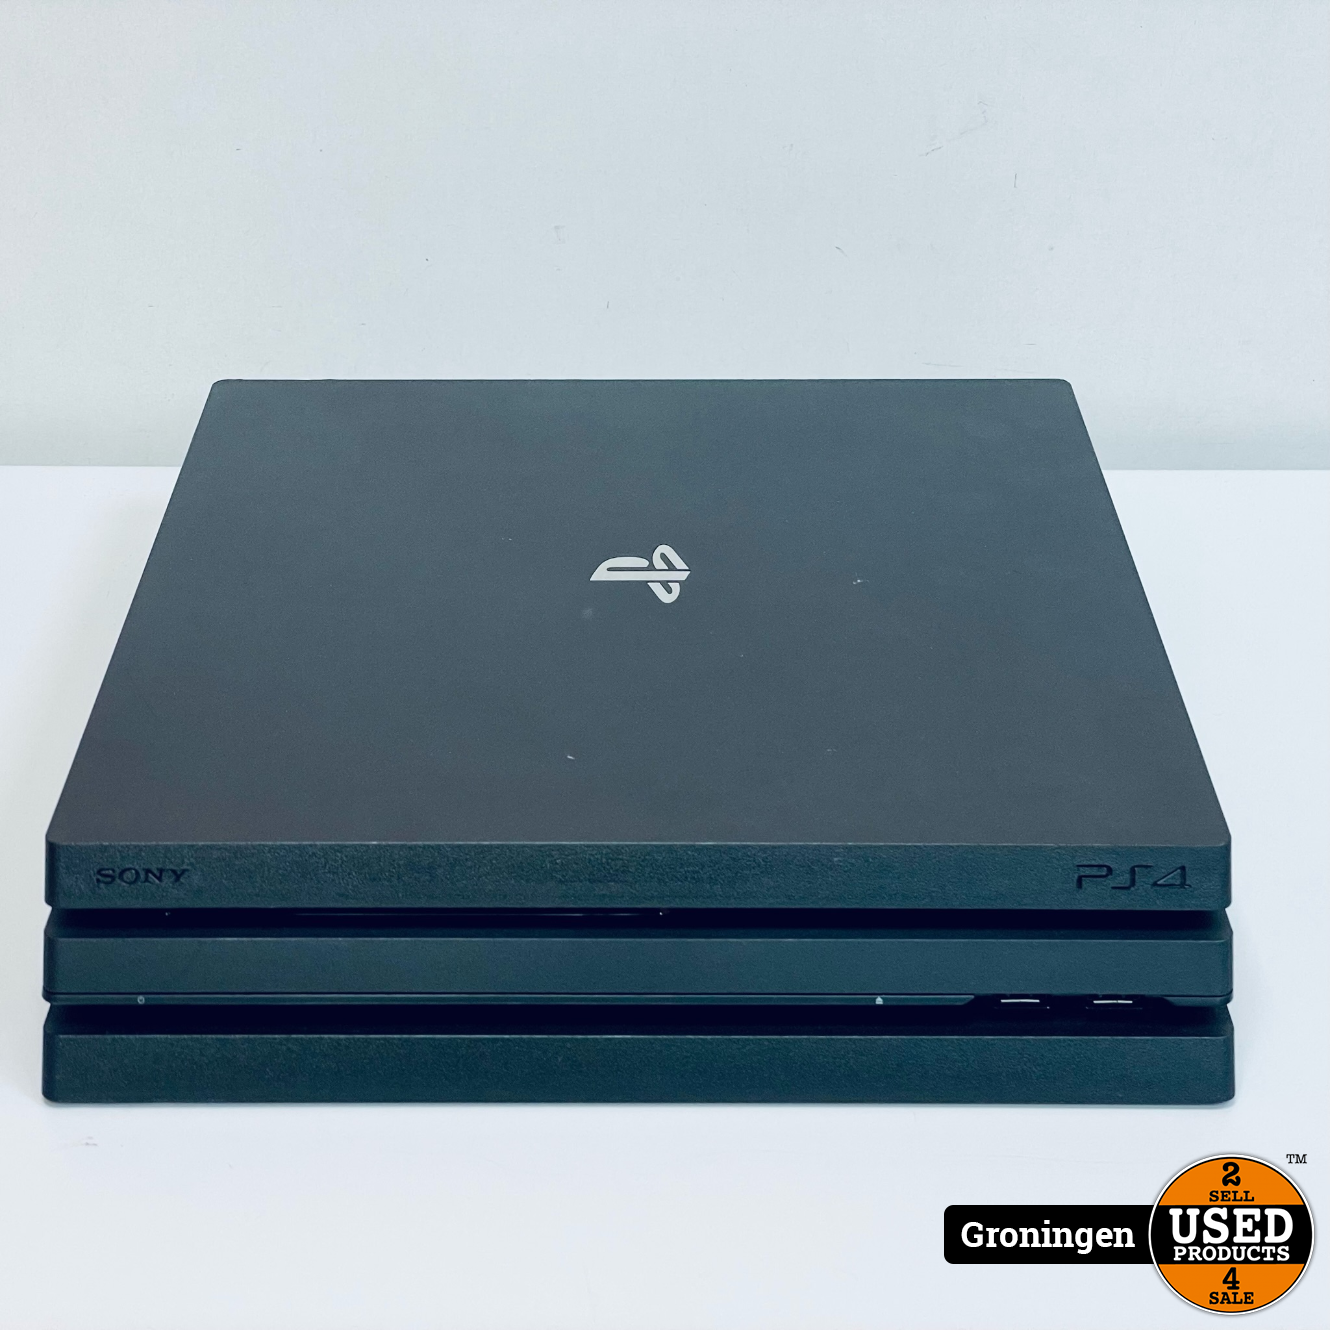 hoe vaak Hijsen musical PS4] Sony PlayStation 4 PRO 1TB Zwart CUH-7216B | excl. Controller - Used  Products Groningen